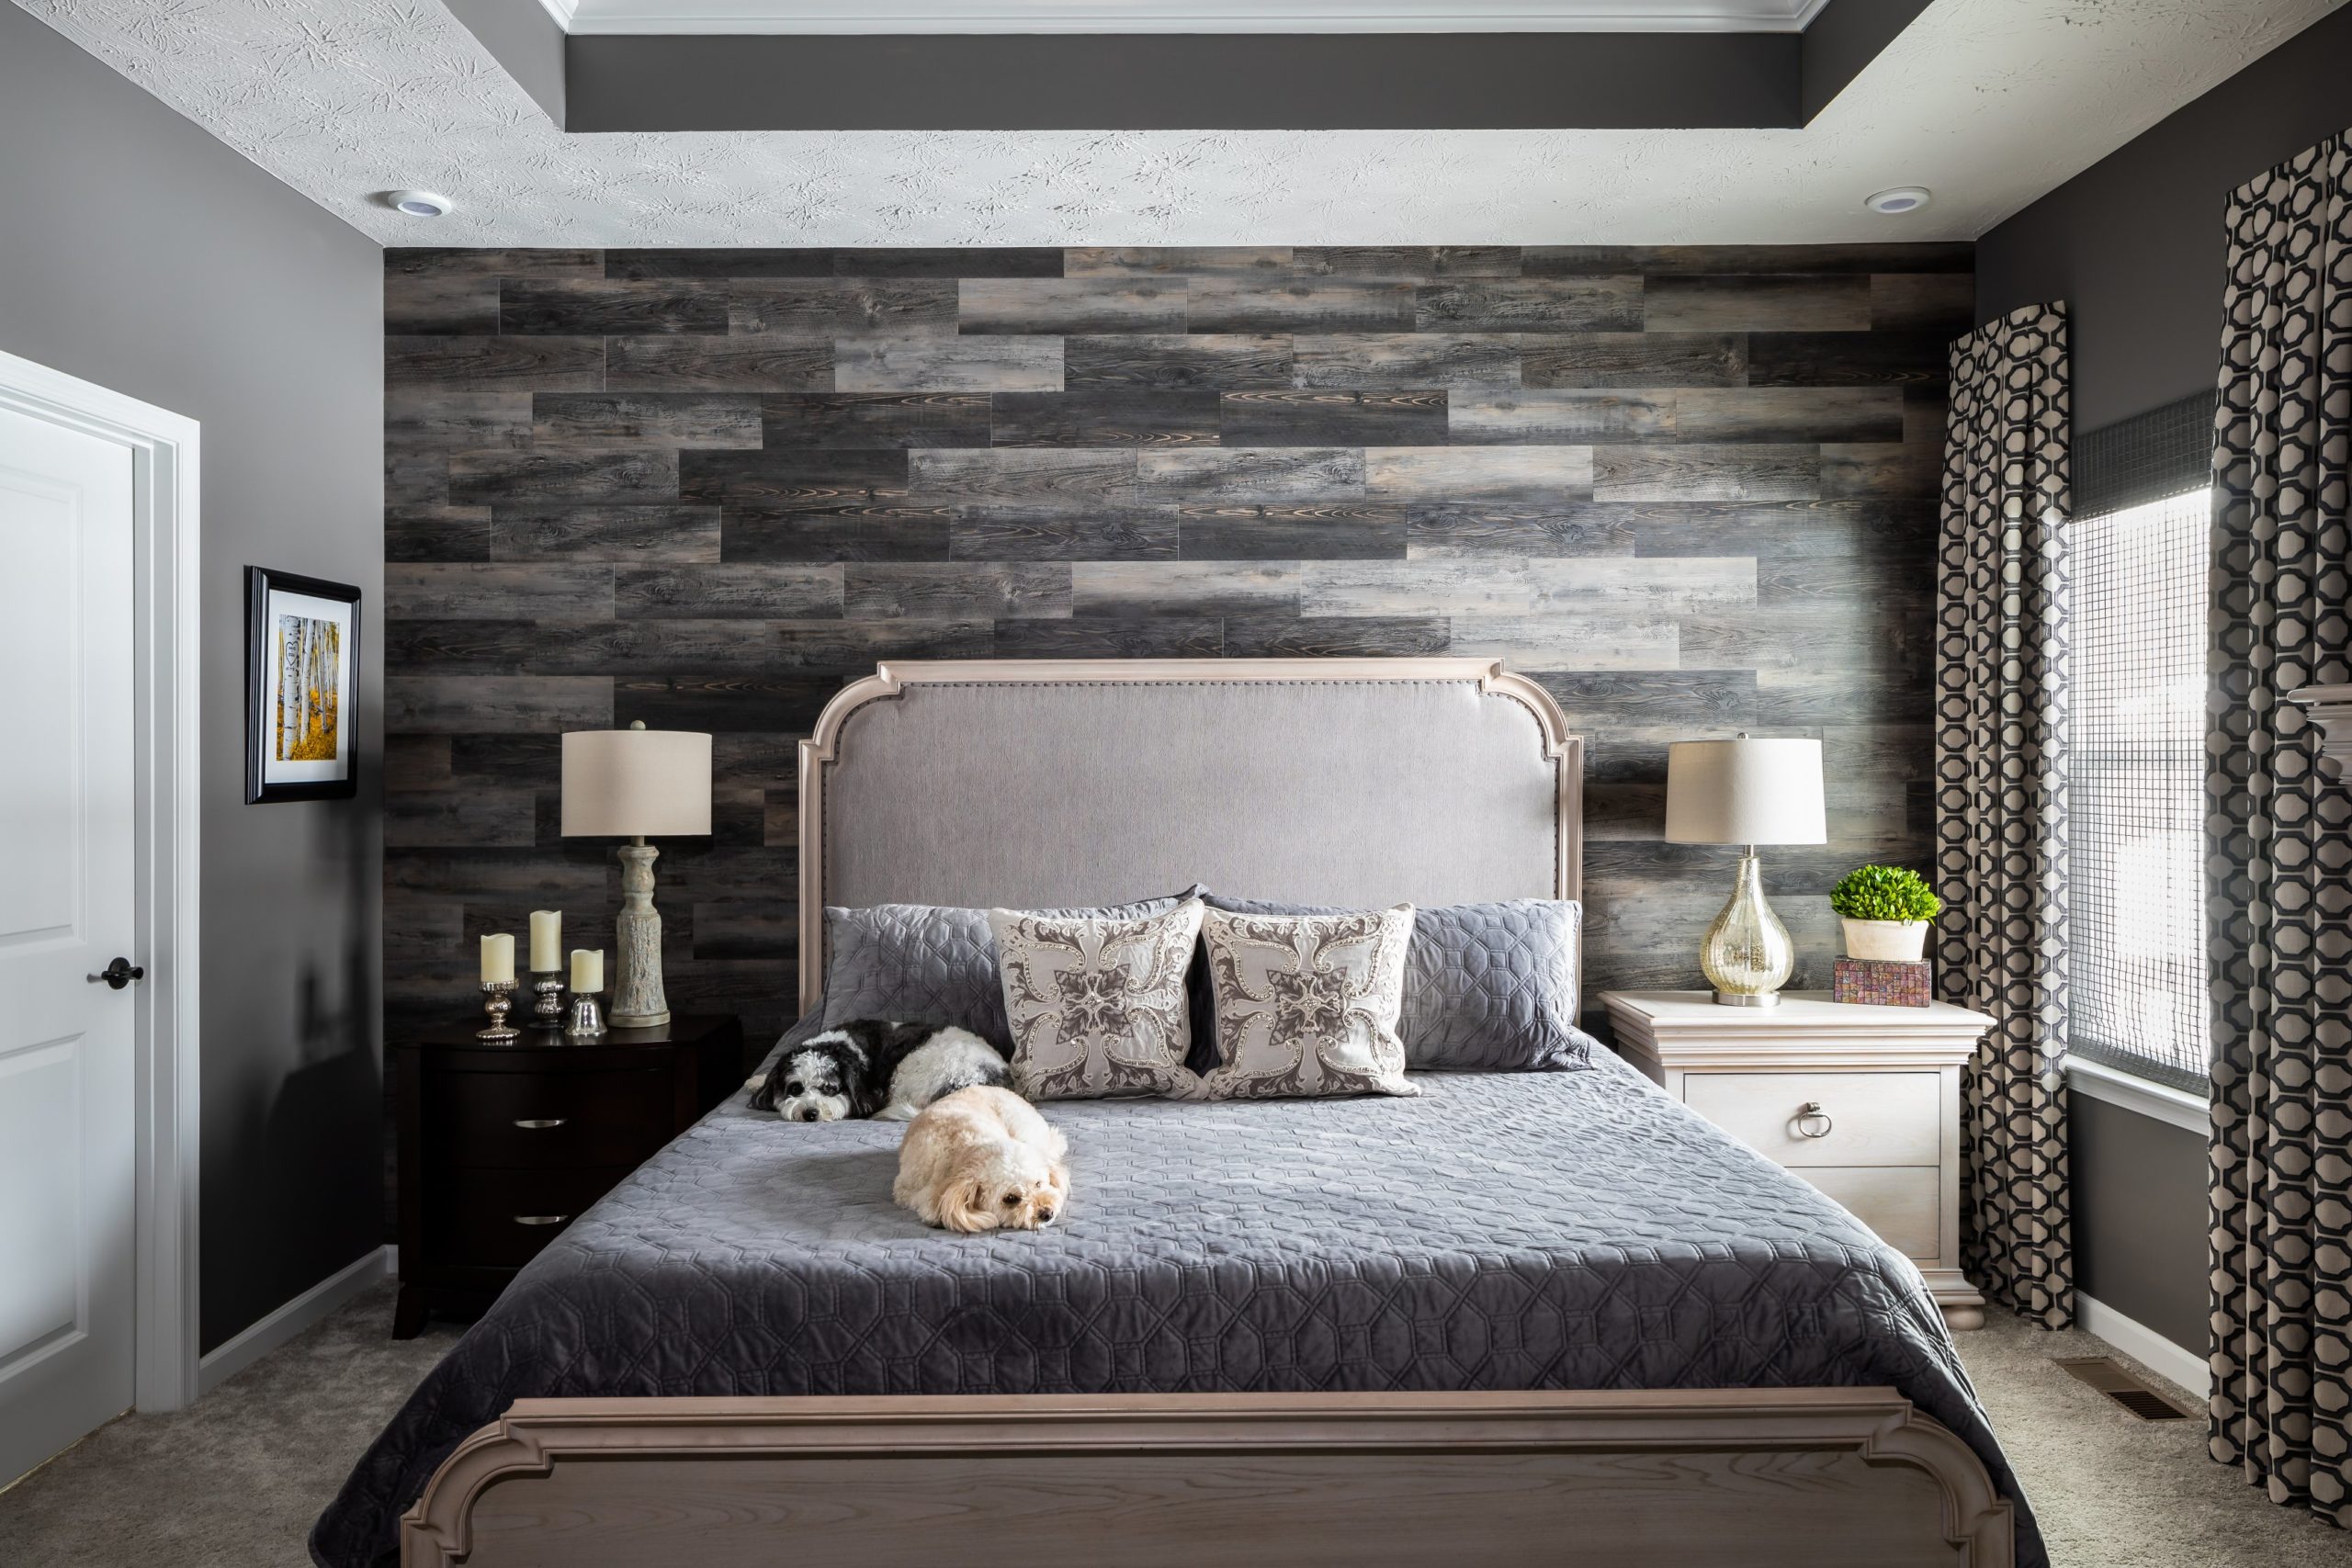 Classy Master Bedroom - Dogs on Bed